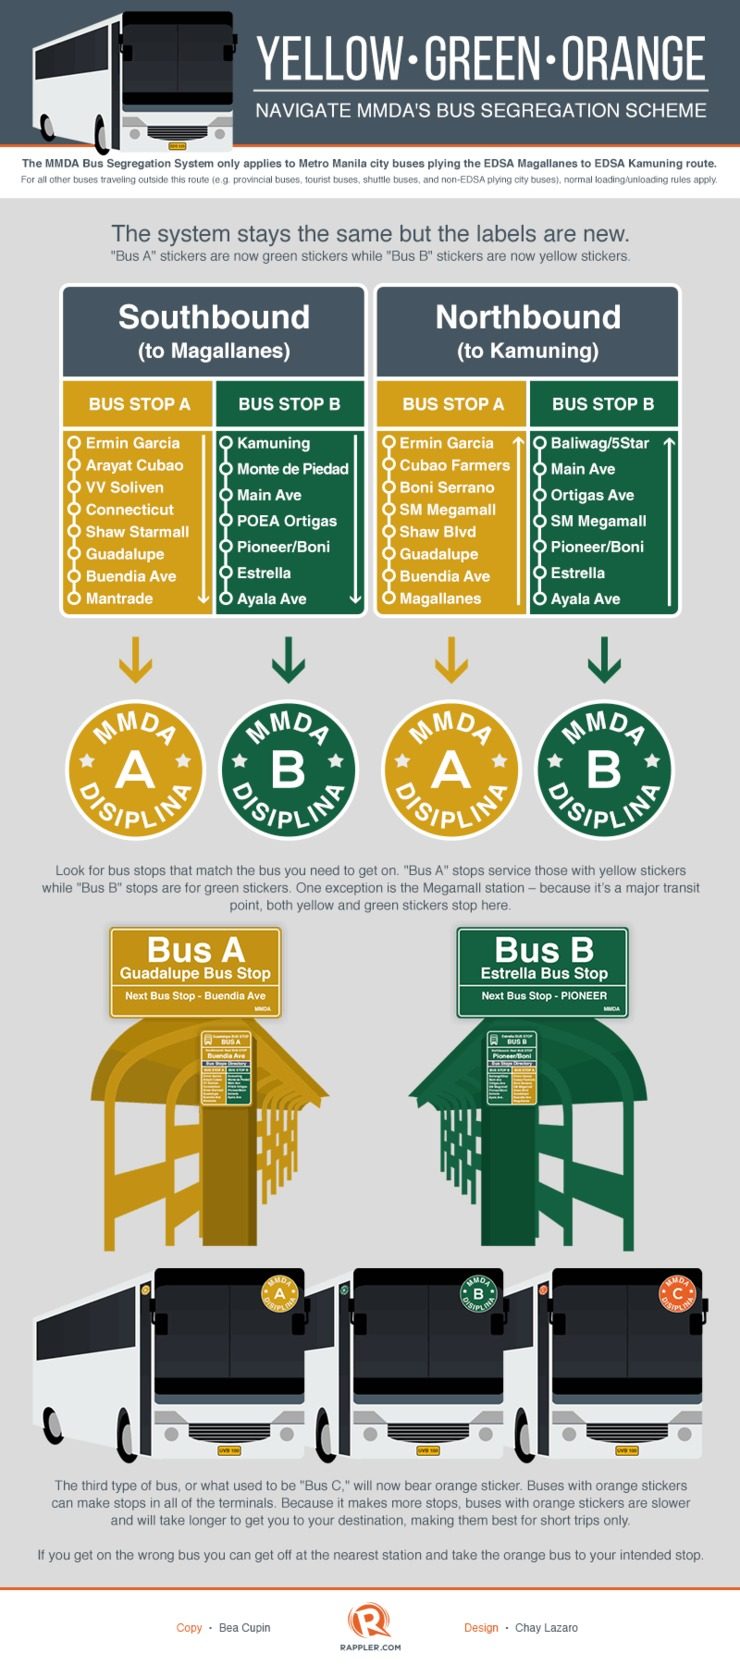 Yellow, green, orange: A guide to MMDA’s new bus codes